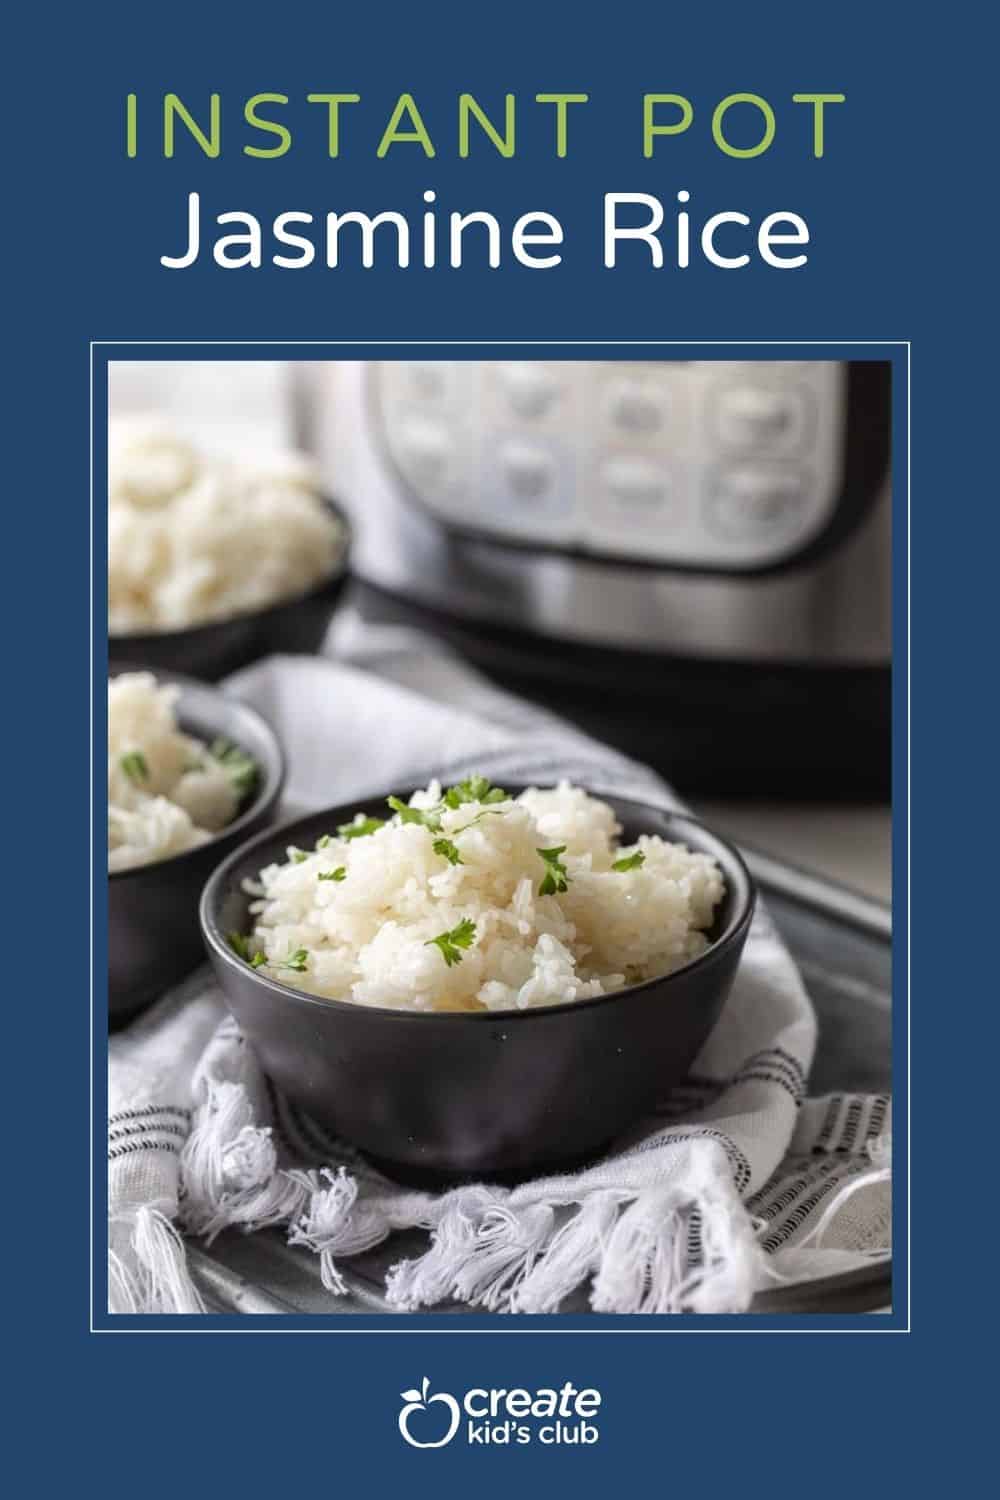 Pin of instant pot jasmine rice shown in a bowl.